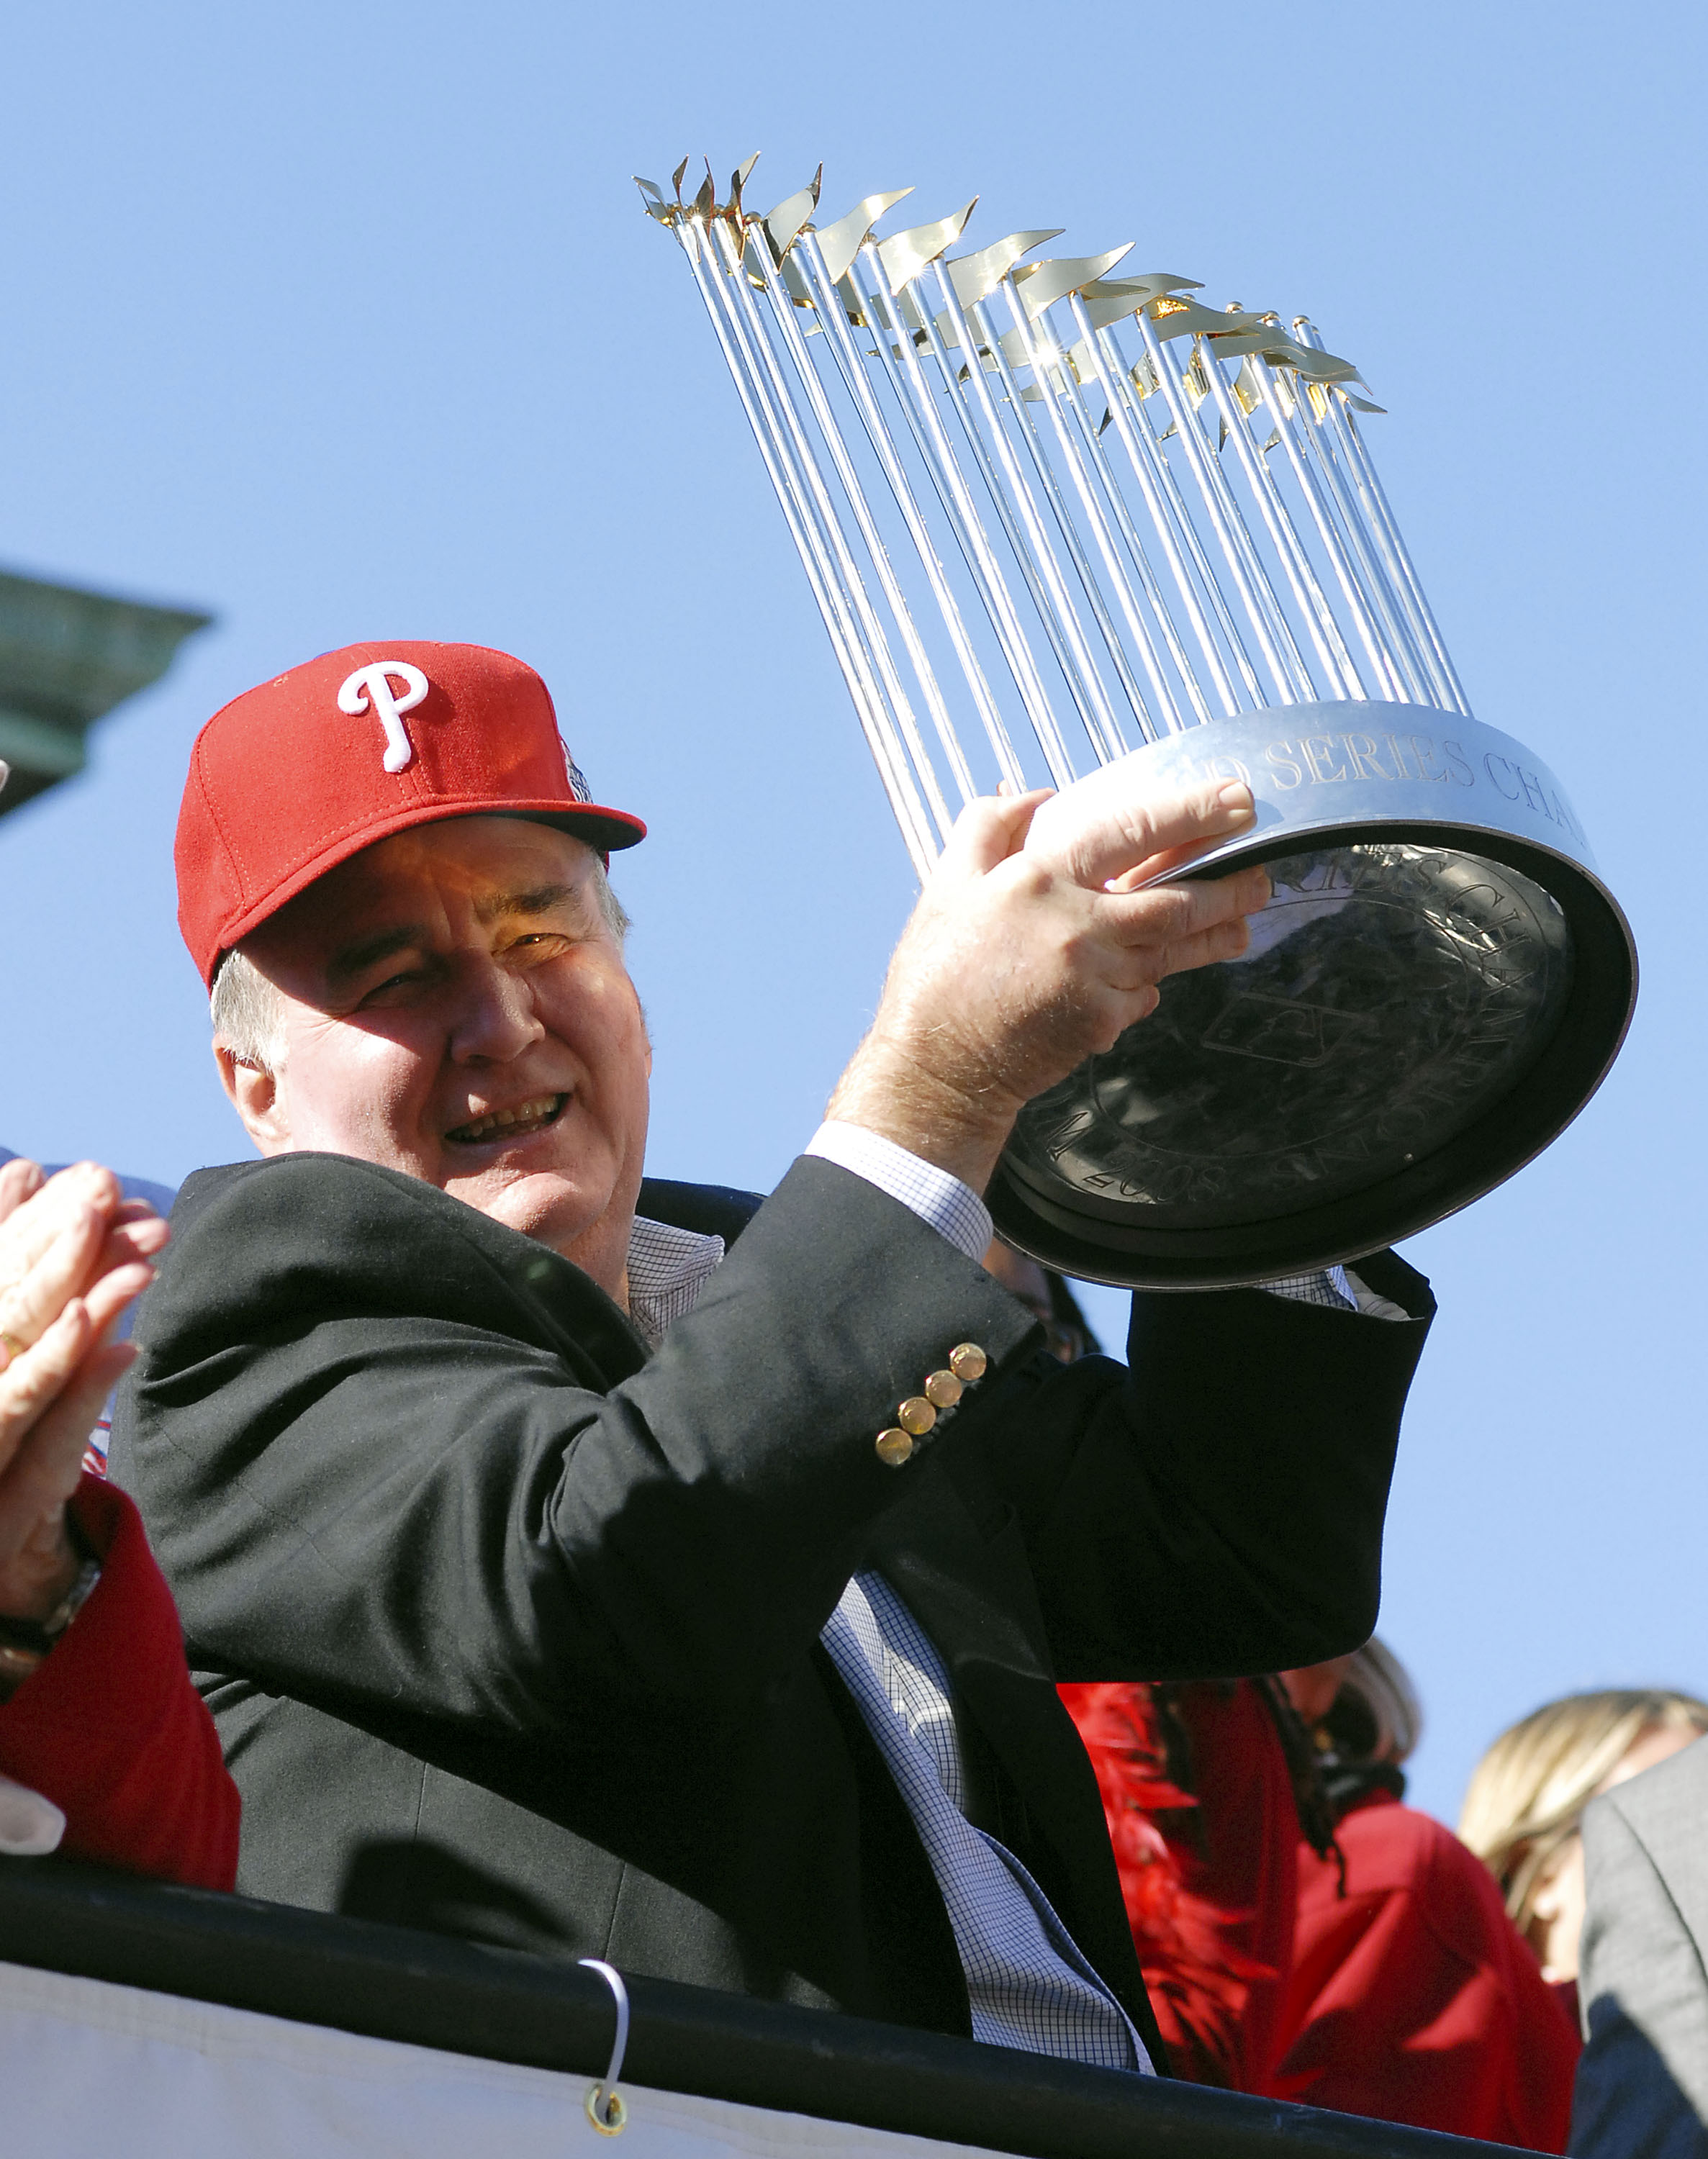 PHILADELPHIA, PA - OCTOBER 31: Philadelphia Phillies President Dave Montgomery hold the World Series trophy during the World Championship Parade October 31, 2008 in Philadelphia, Pennsylvania. The Phillies defeated the Tampa Bay Rays to win their first Wo